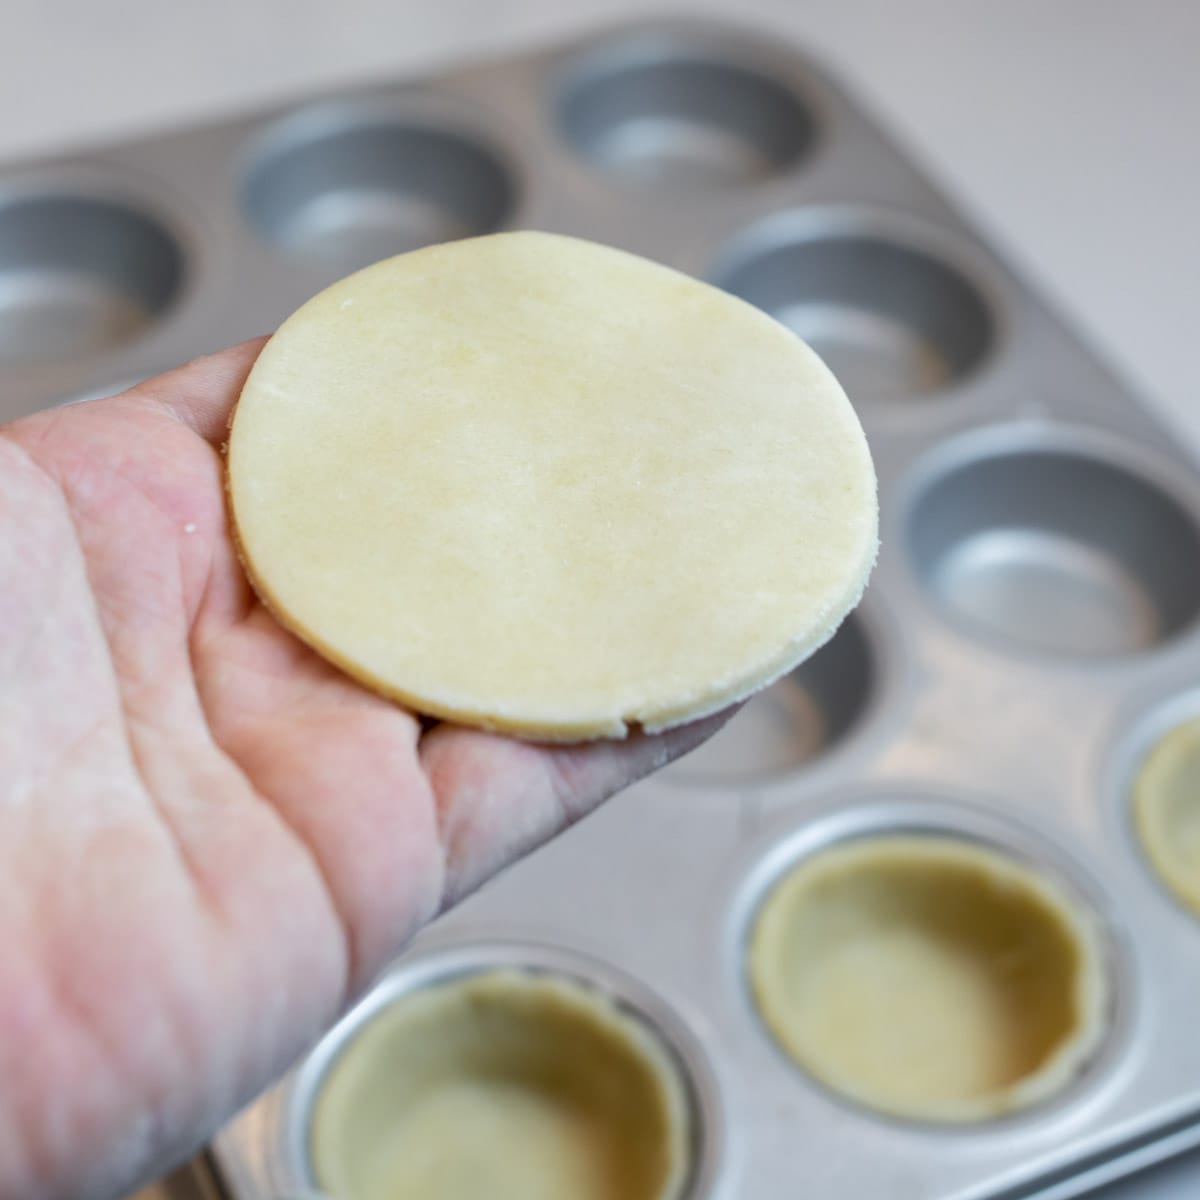 Holding a cut out circle of pastry dough.